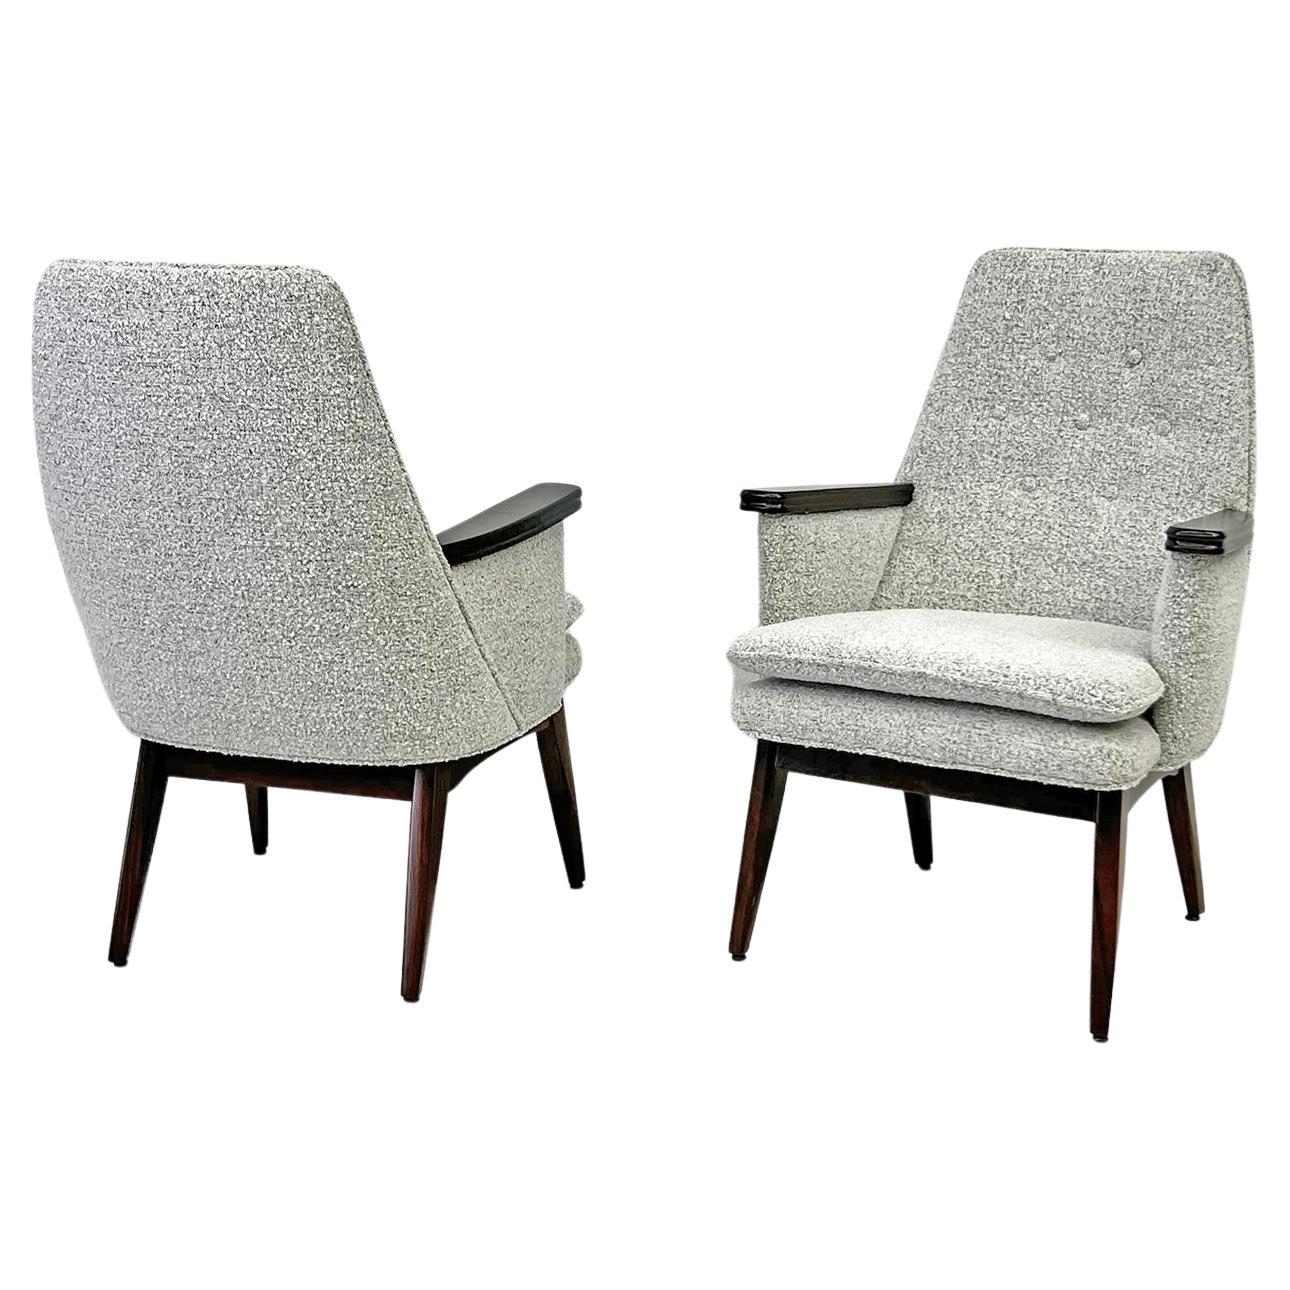 Button Tufted Mid Century Modern Lounge Chairs in Salt & Pepper Boucle Walnut